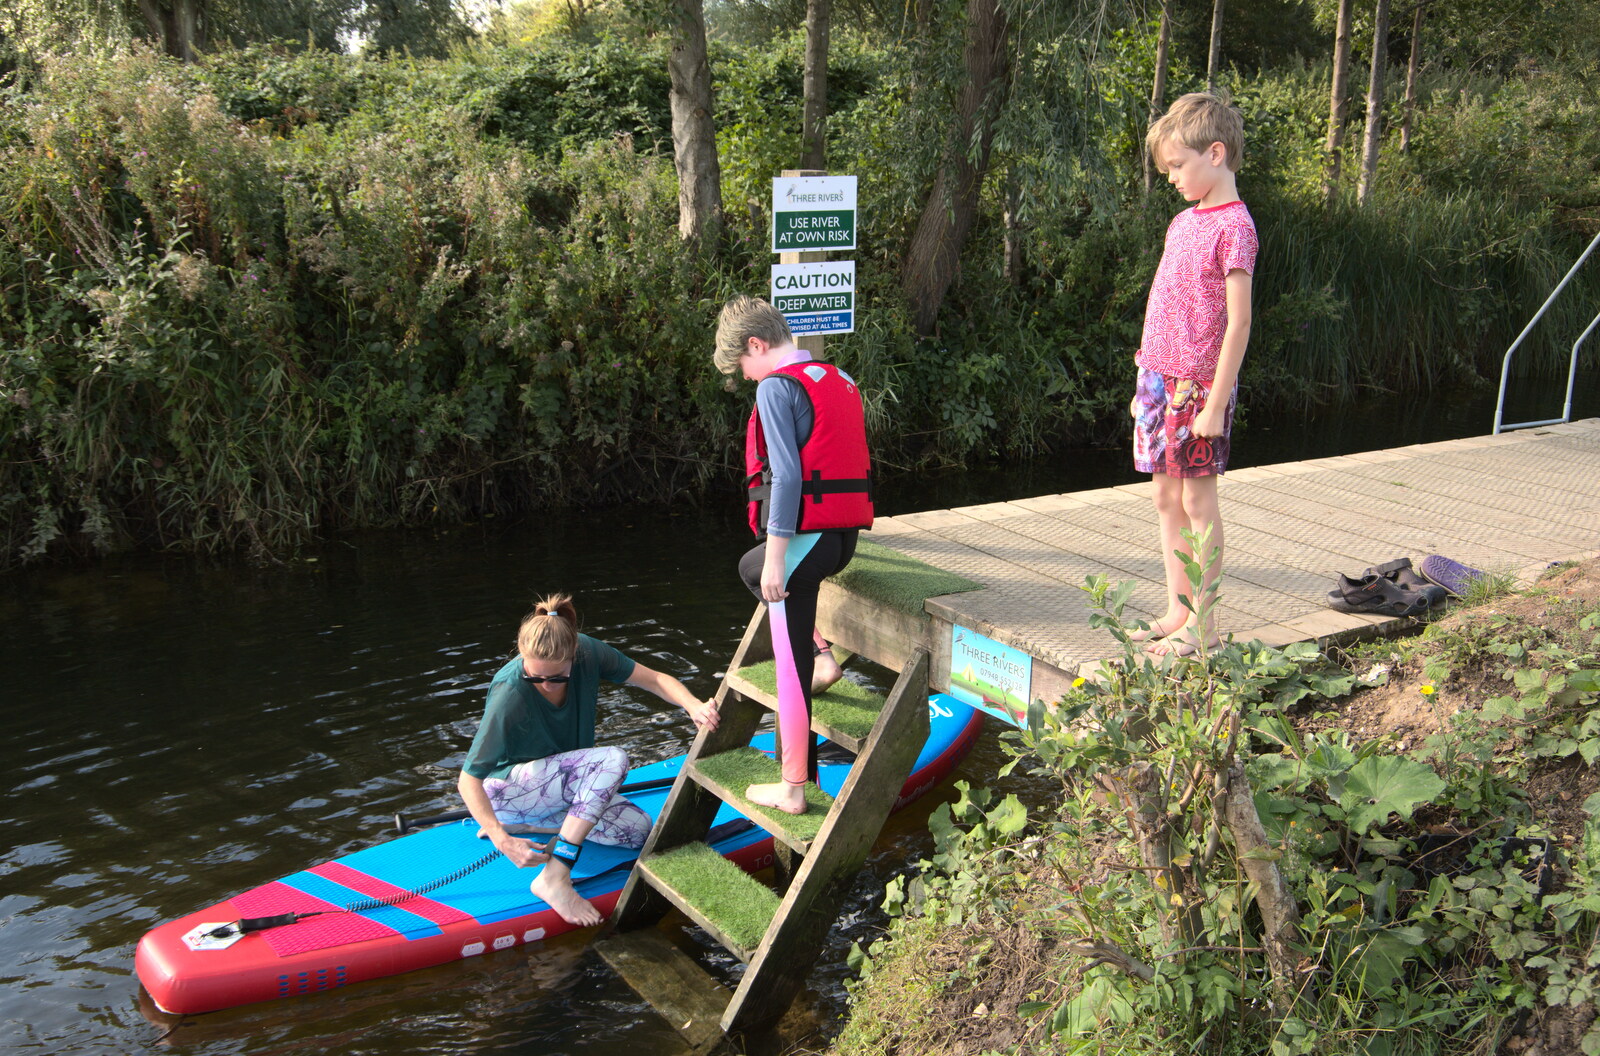 Camping at Three Rivers, Geldeston, Norfolk - 5th September 2020: CLimbing down to the river